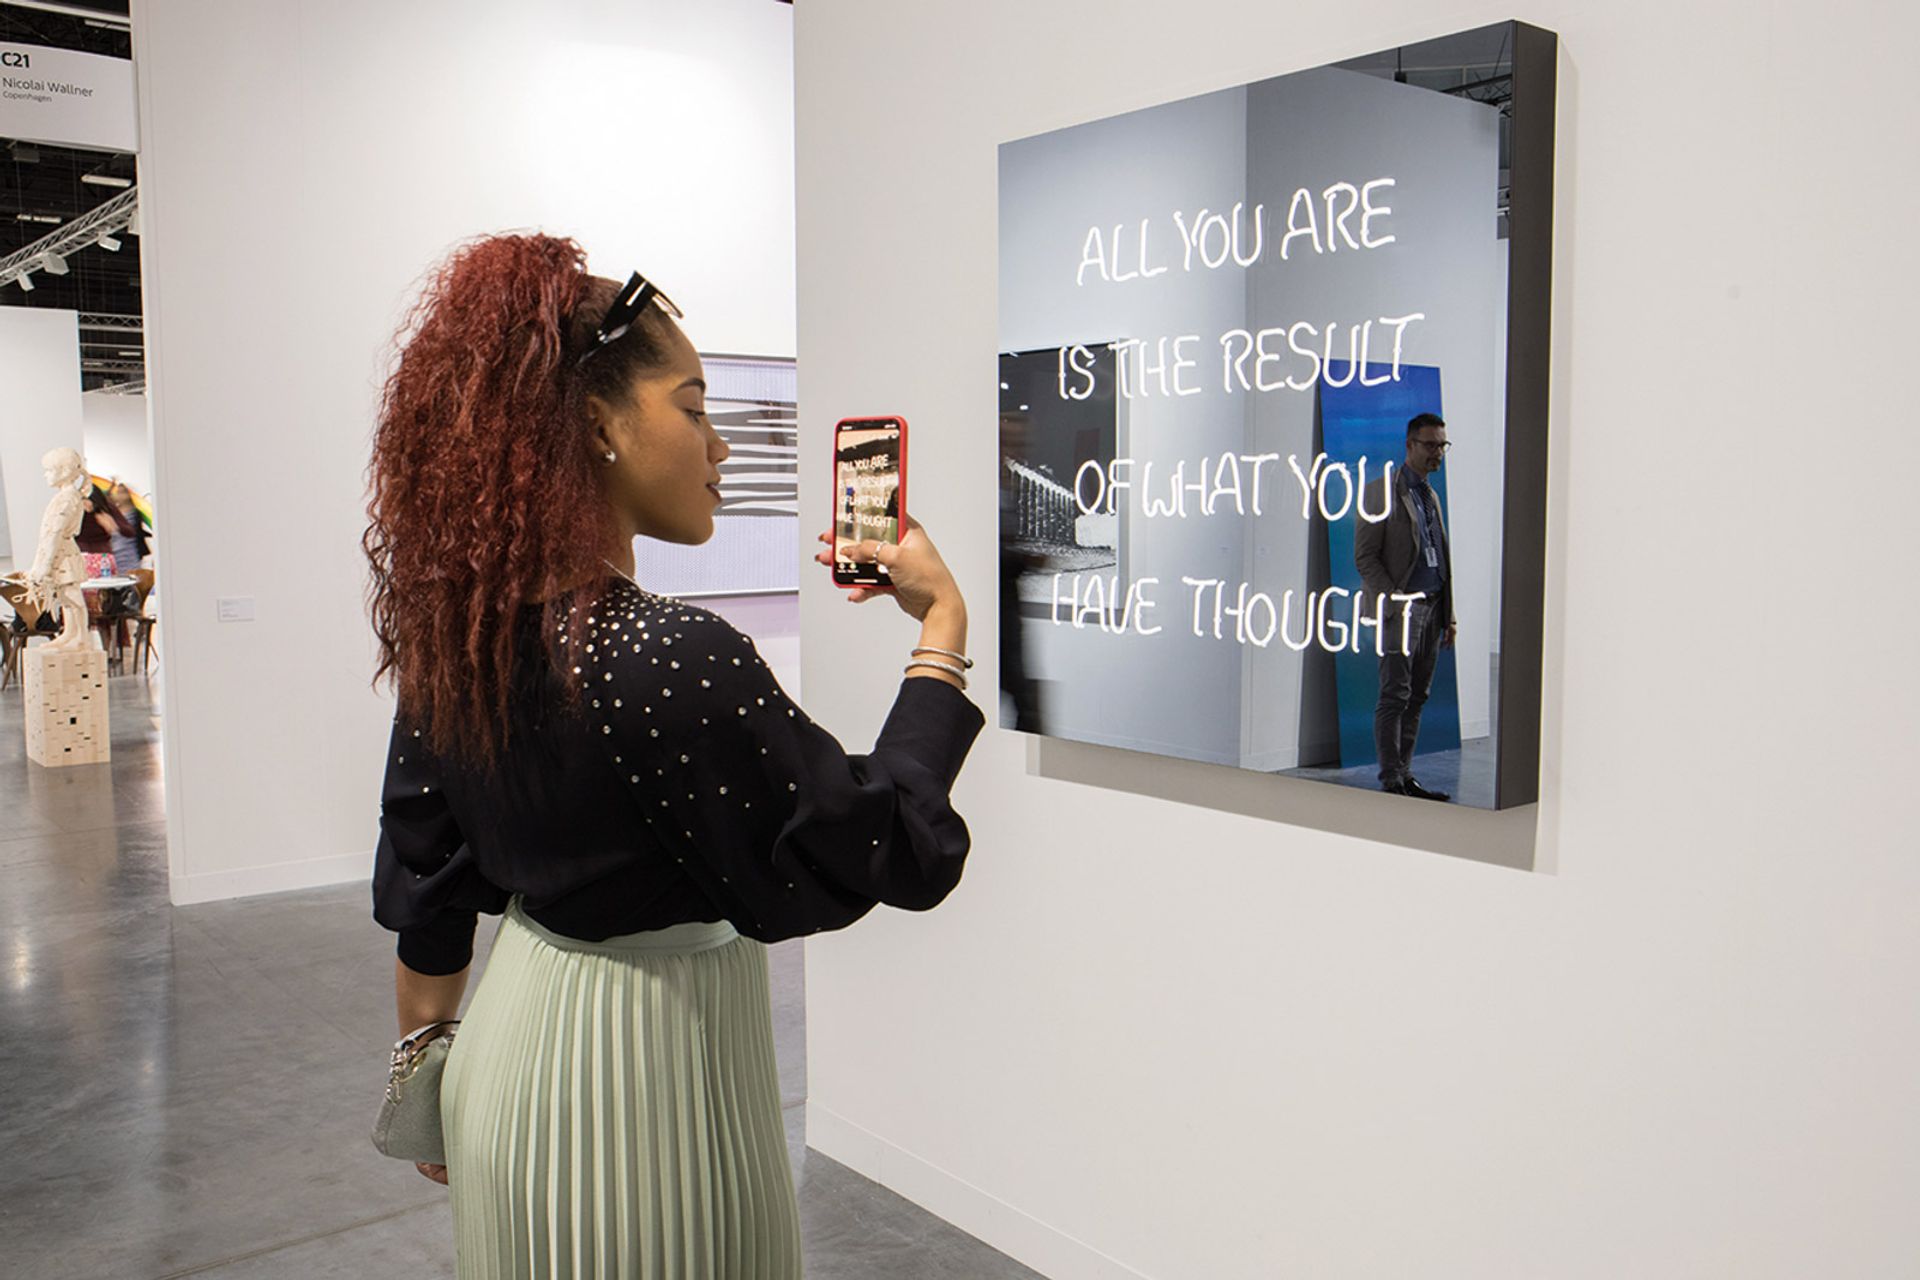 Jeppe Hein's All You Are is the Result of What You Have Thought (2019) at Art Basel in Miami Beach 2019 © David Owens